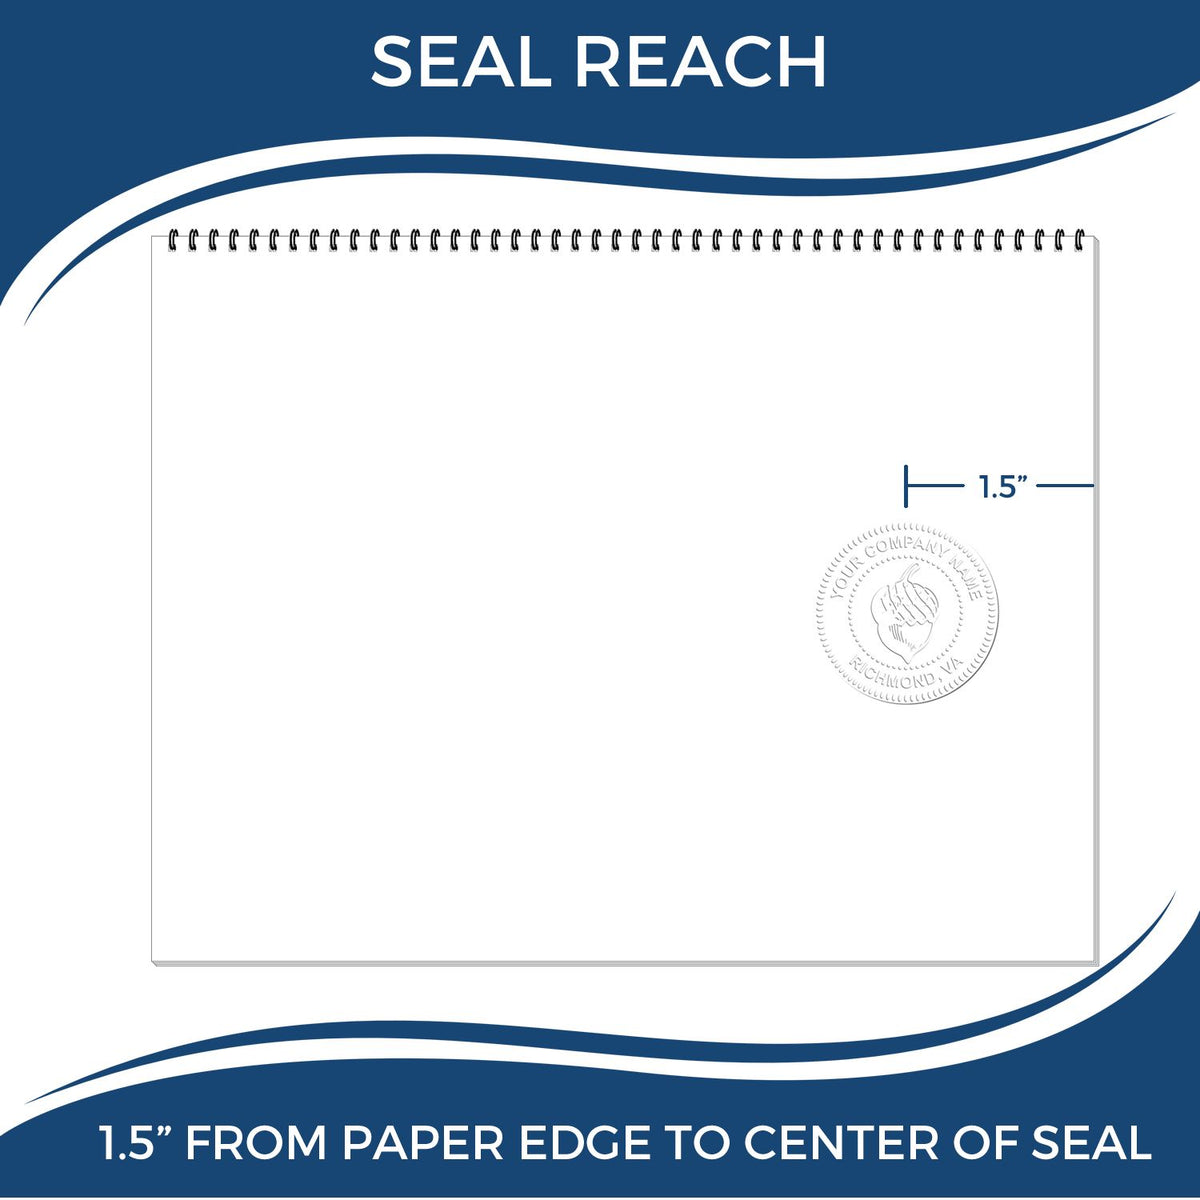 An infographic showing the seal reach which is represented by a ruler and a miniature seal image of the Soft Illinois Professional Engineer Seal